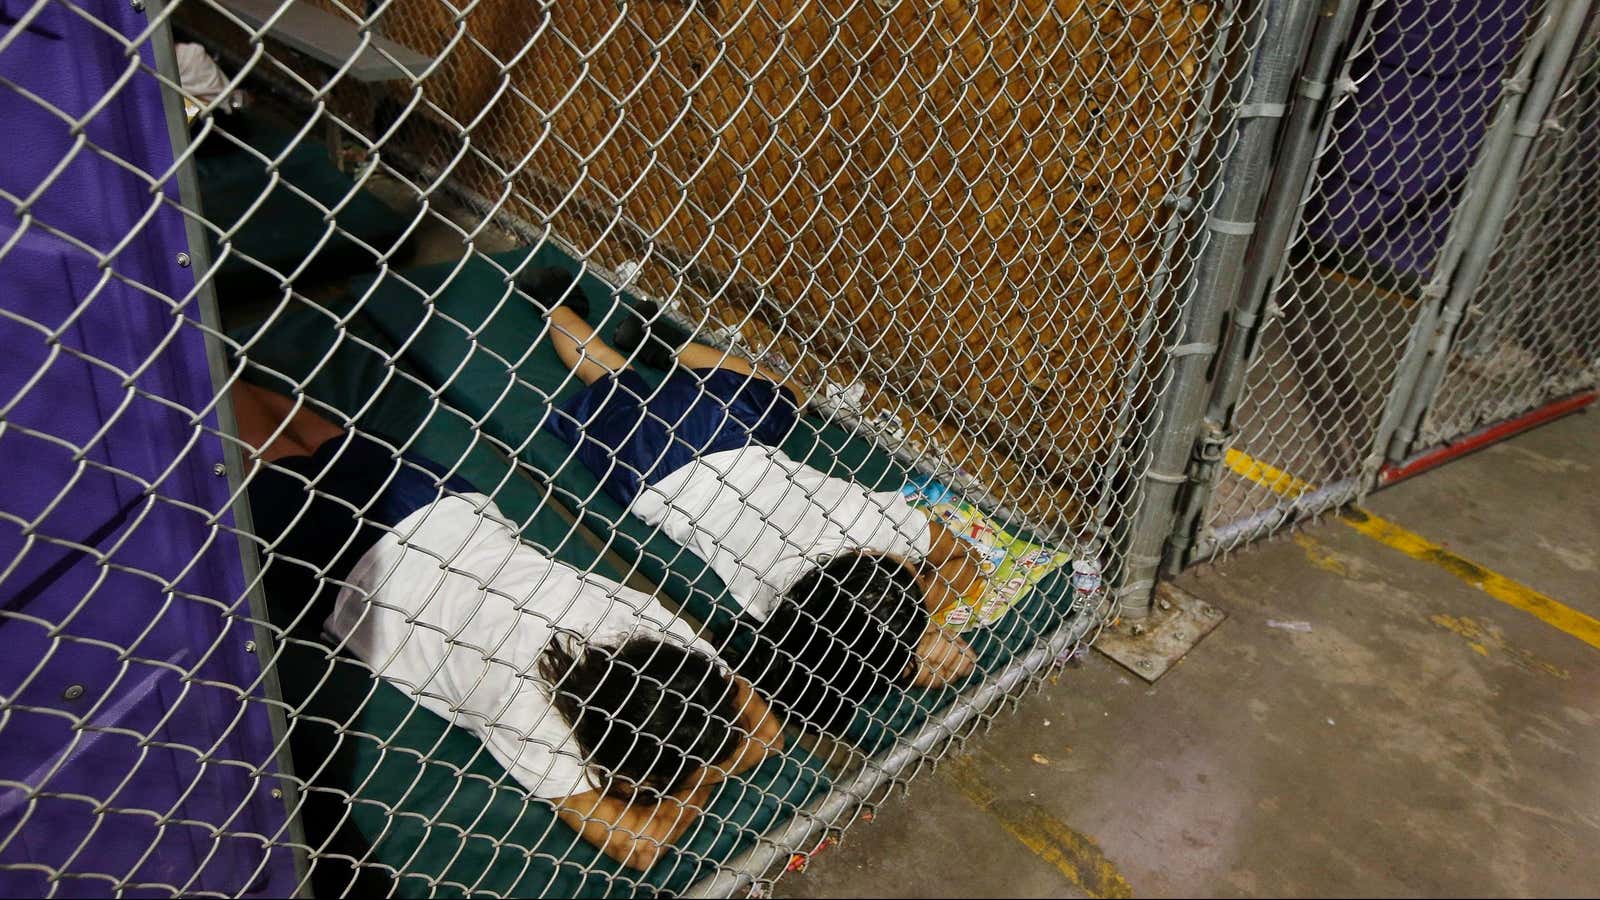 Immigrant girls sleep in a cell, Jun. 18, 2014.